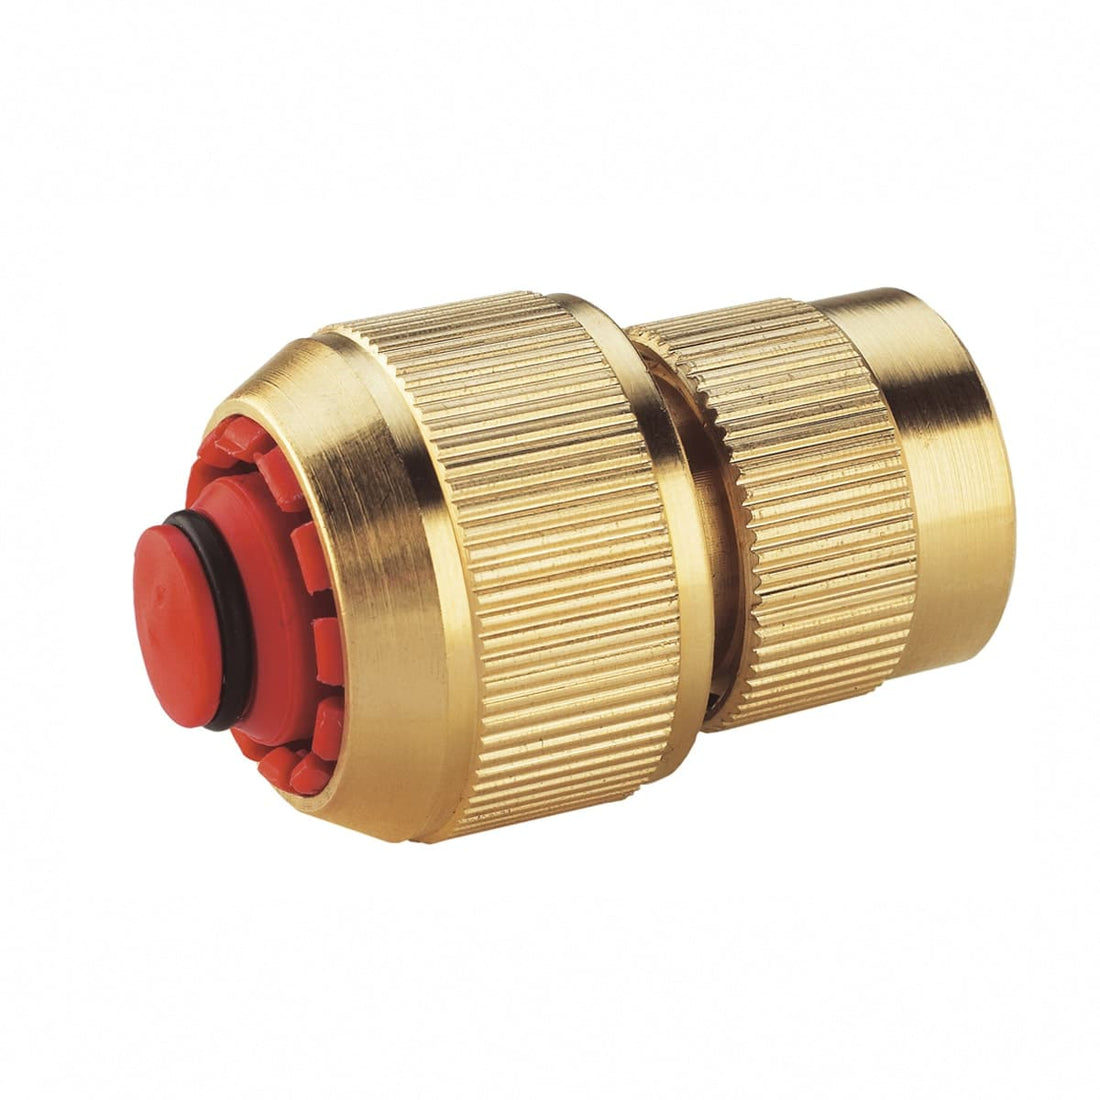 BRASS QUICK COUPLING WITH AQUASTOP FOR 19 MM DIAMETER PIPES COLORTAP - best price from Maltashopper.com BR500410130